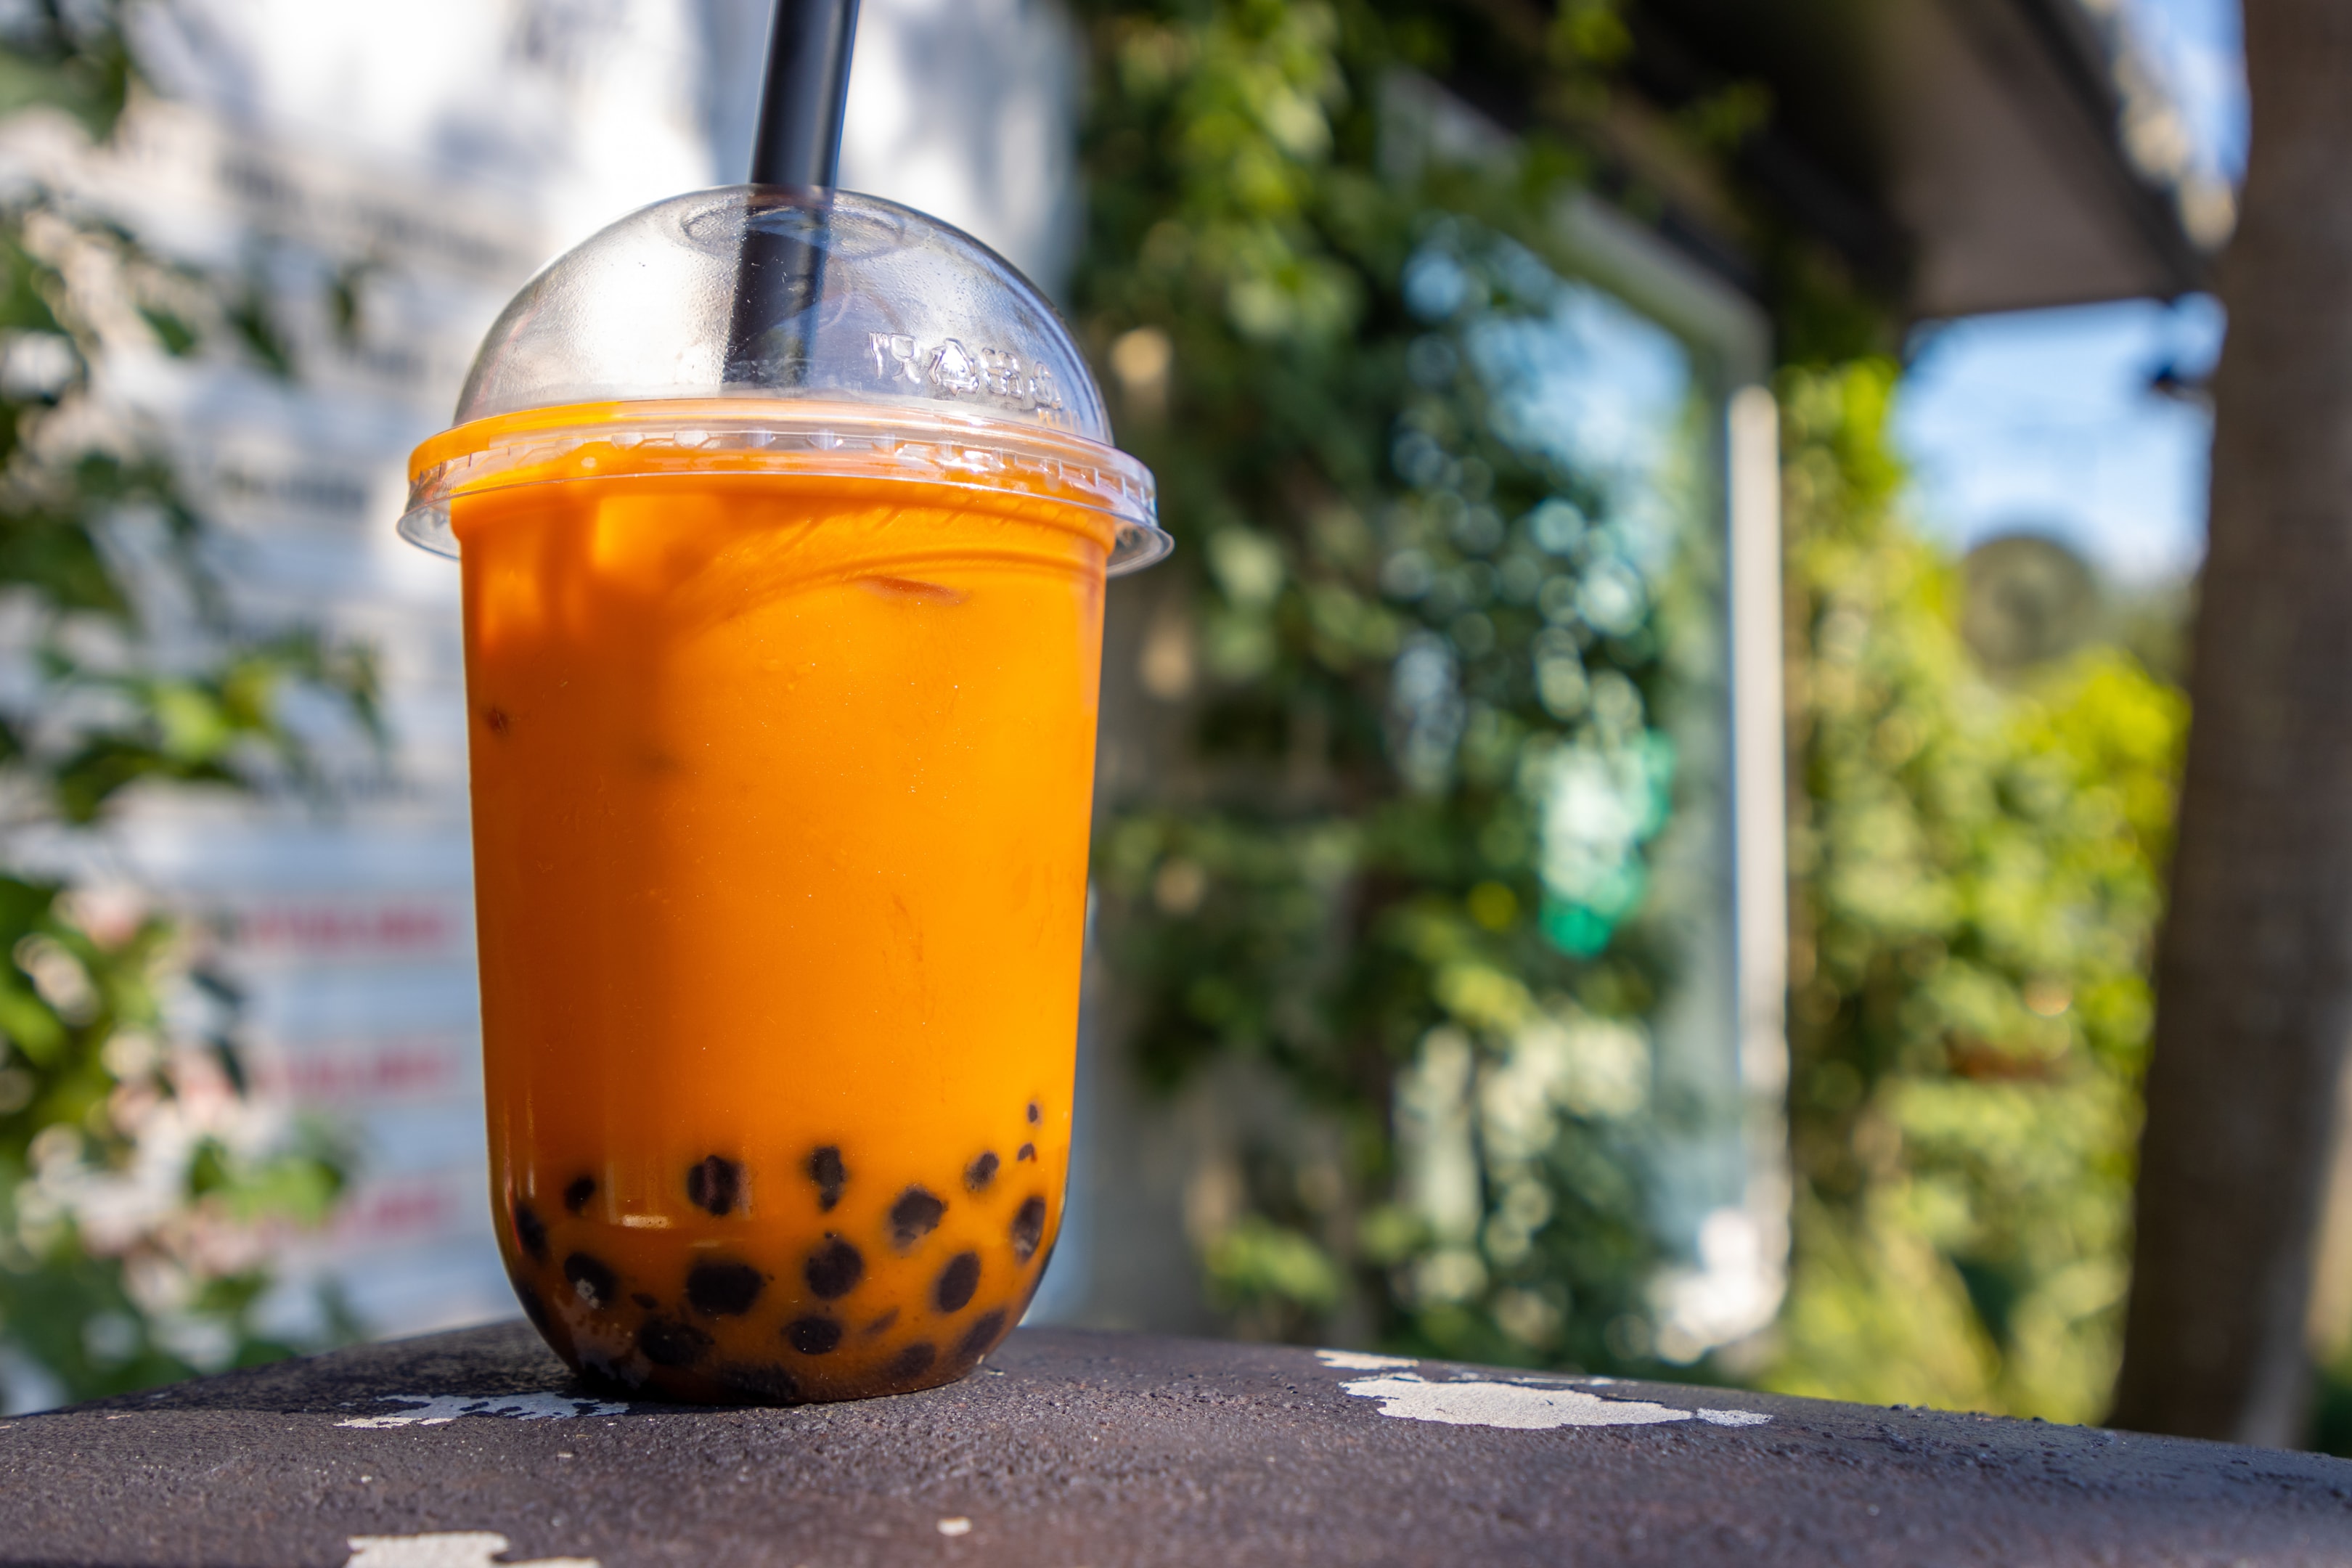 What Is Boba? Boba Tea Guide & Definitions